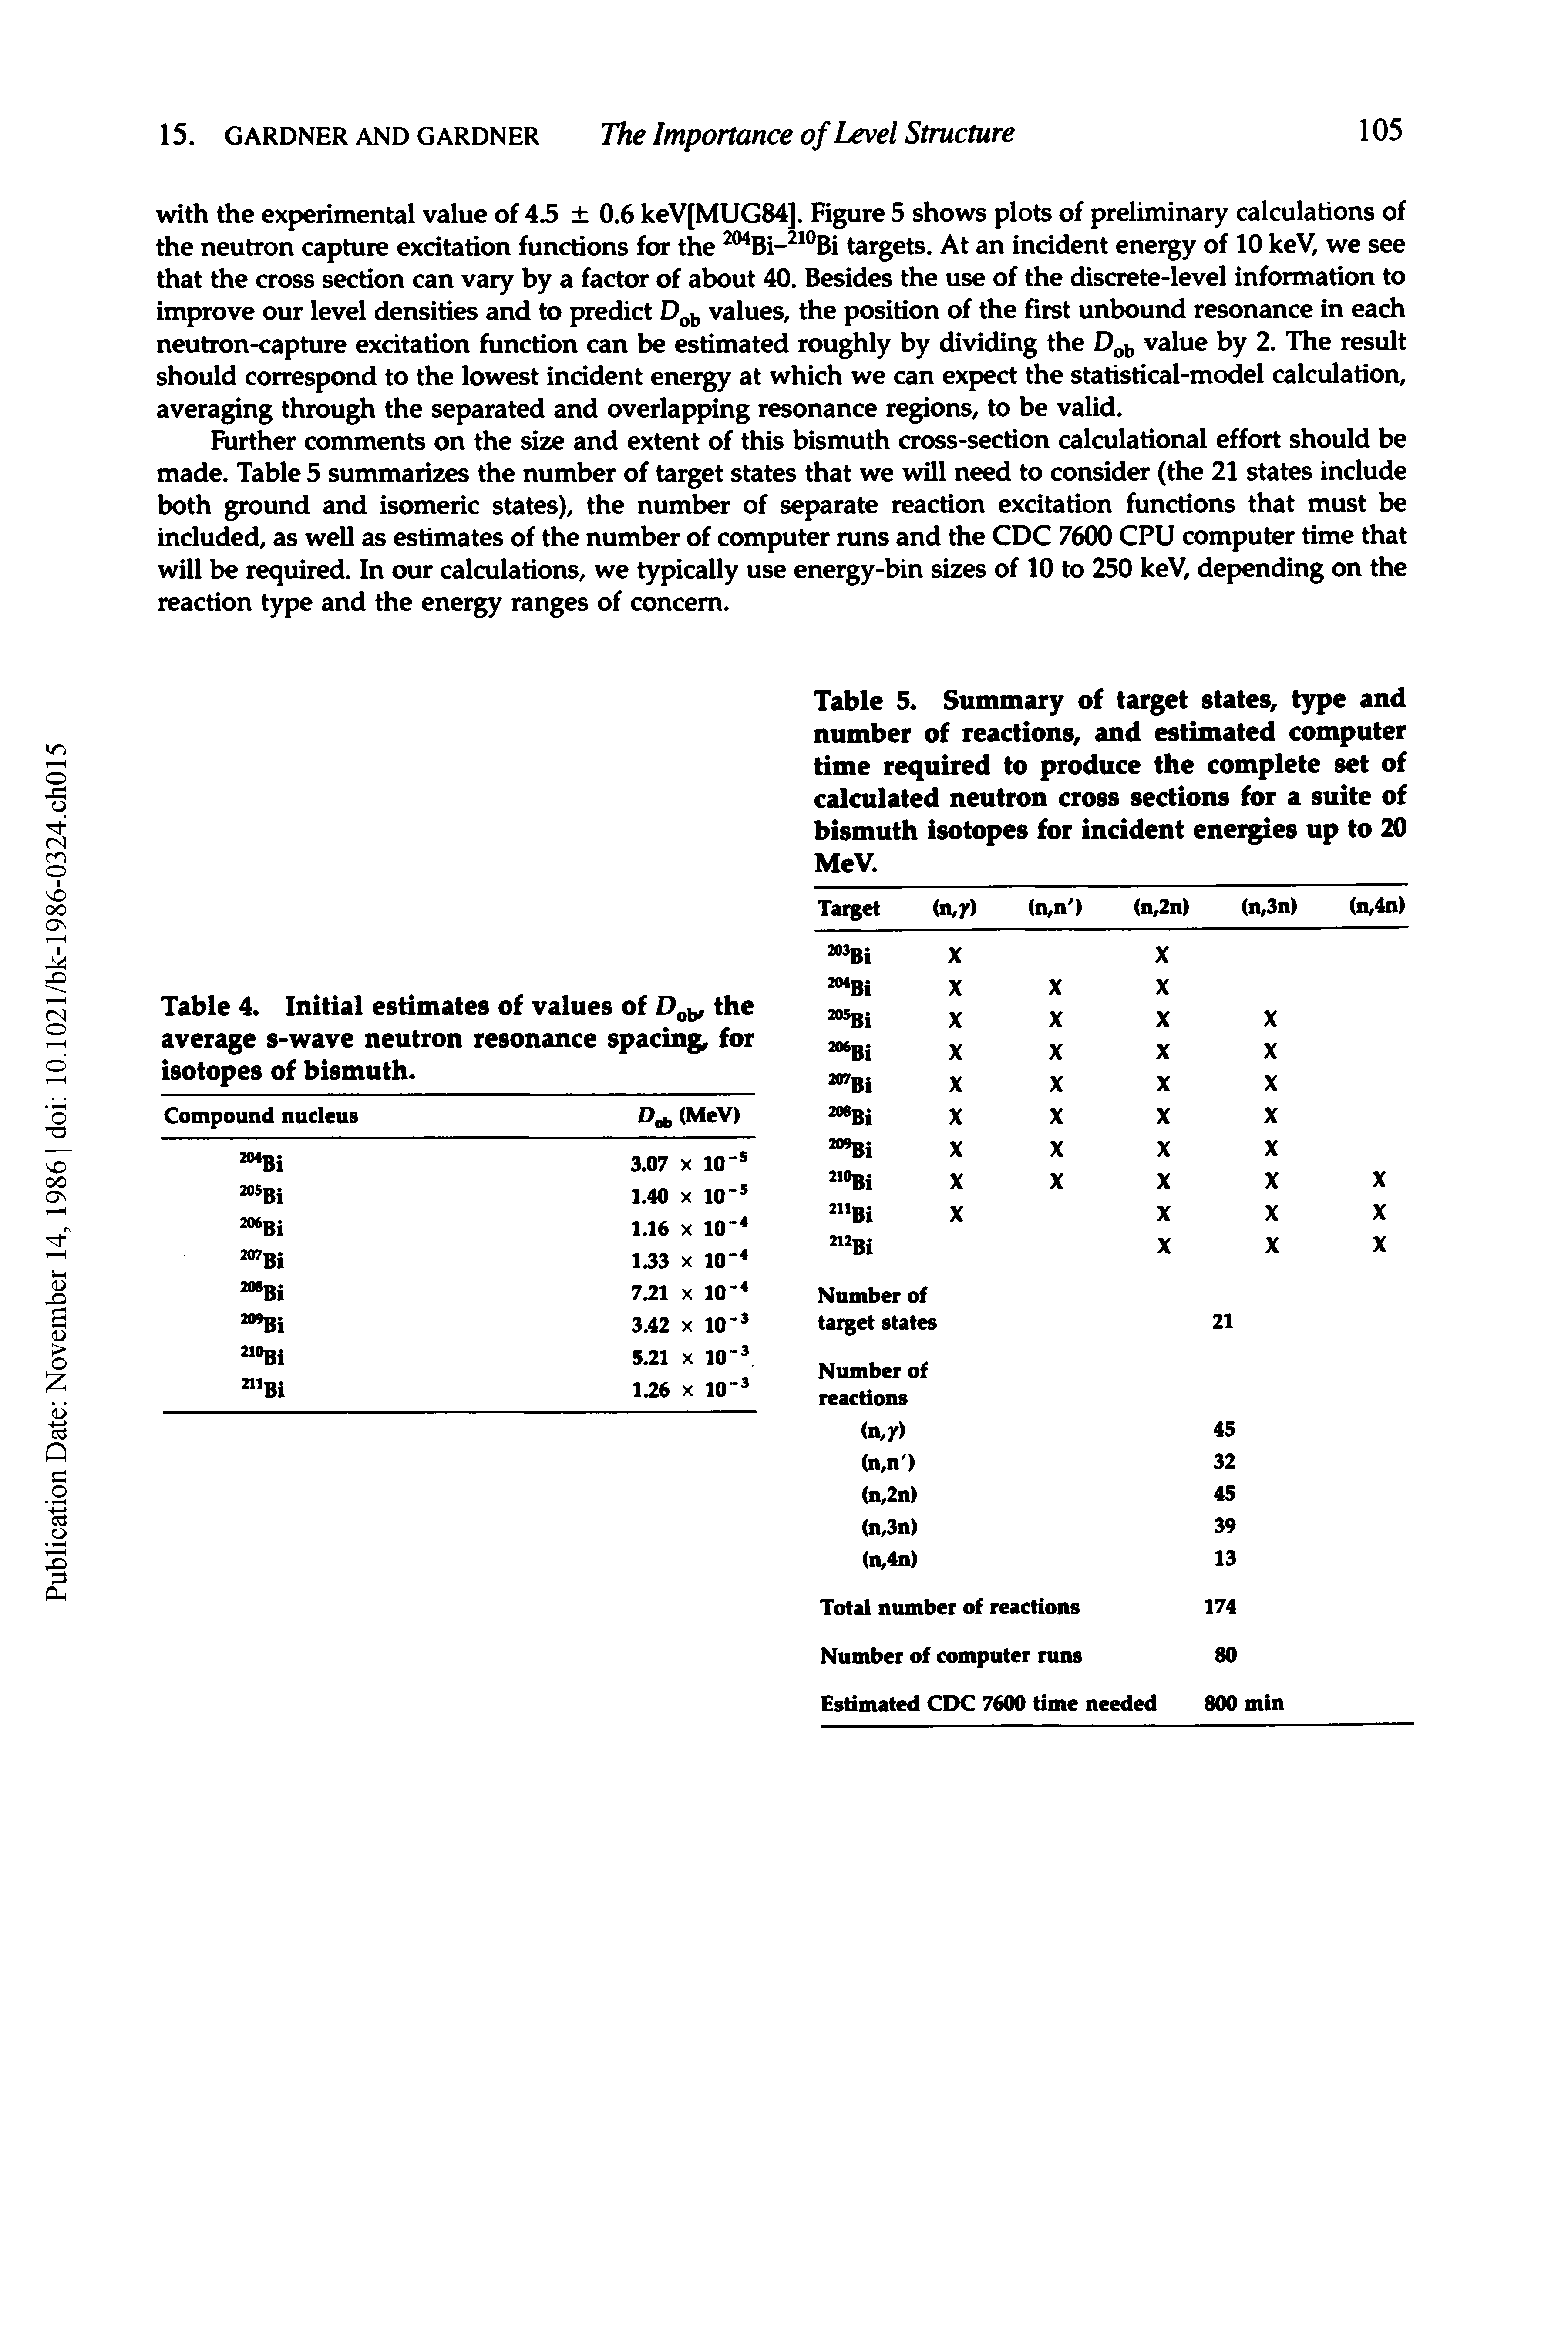 Table 5. Summary of target states, type and number of reactions, and estimated computer time required to produce the complete set of calculated neutron cross sections for a suite of bismuth isotopes for incident energies up to 20 MeV.